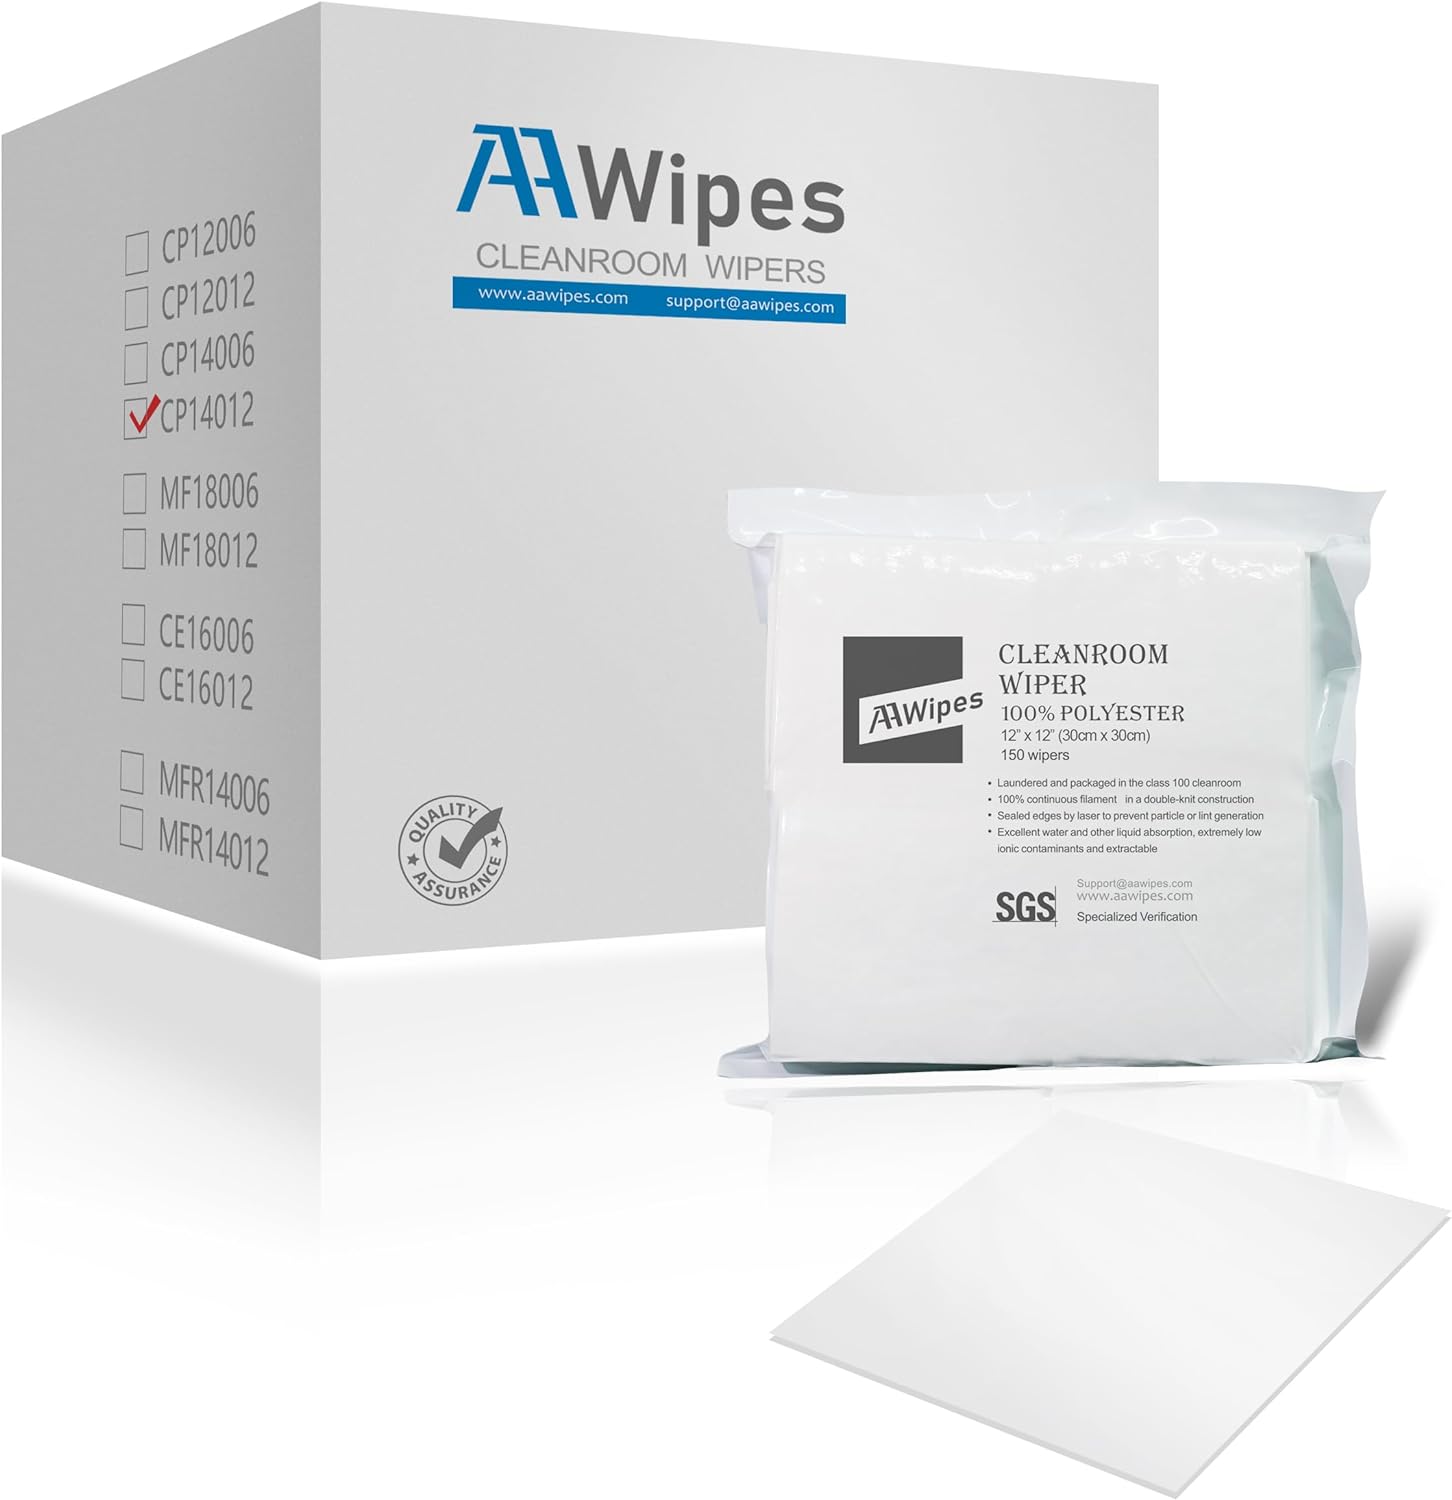 Cleanroom Double Knit 100% Polyester Wipers 12"x12" (Starting at 1 Box with 1,200 Wipes per 8 Bags) (No. CP14012)